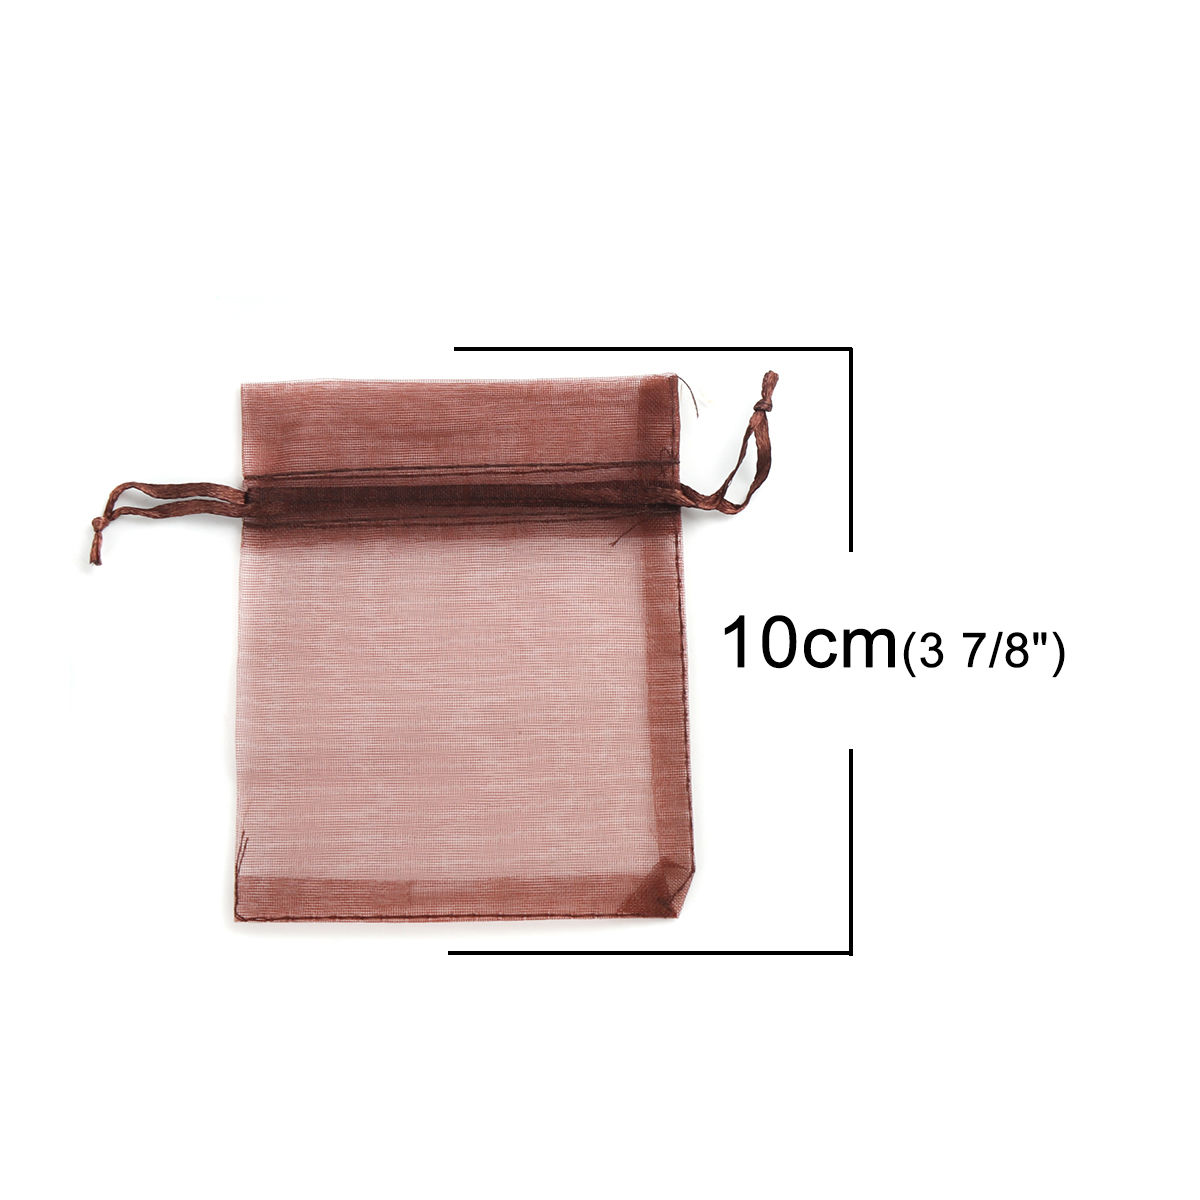 Picture of Wedding Gift Organza Jewelry Bags Drawstring Rectangle At Random 10cm x8cm(3 7/8" x3 1/8"), (Usable Space: 8x8cm) 30 PCs